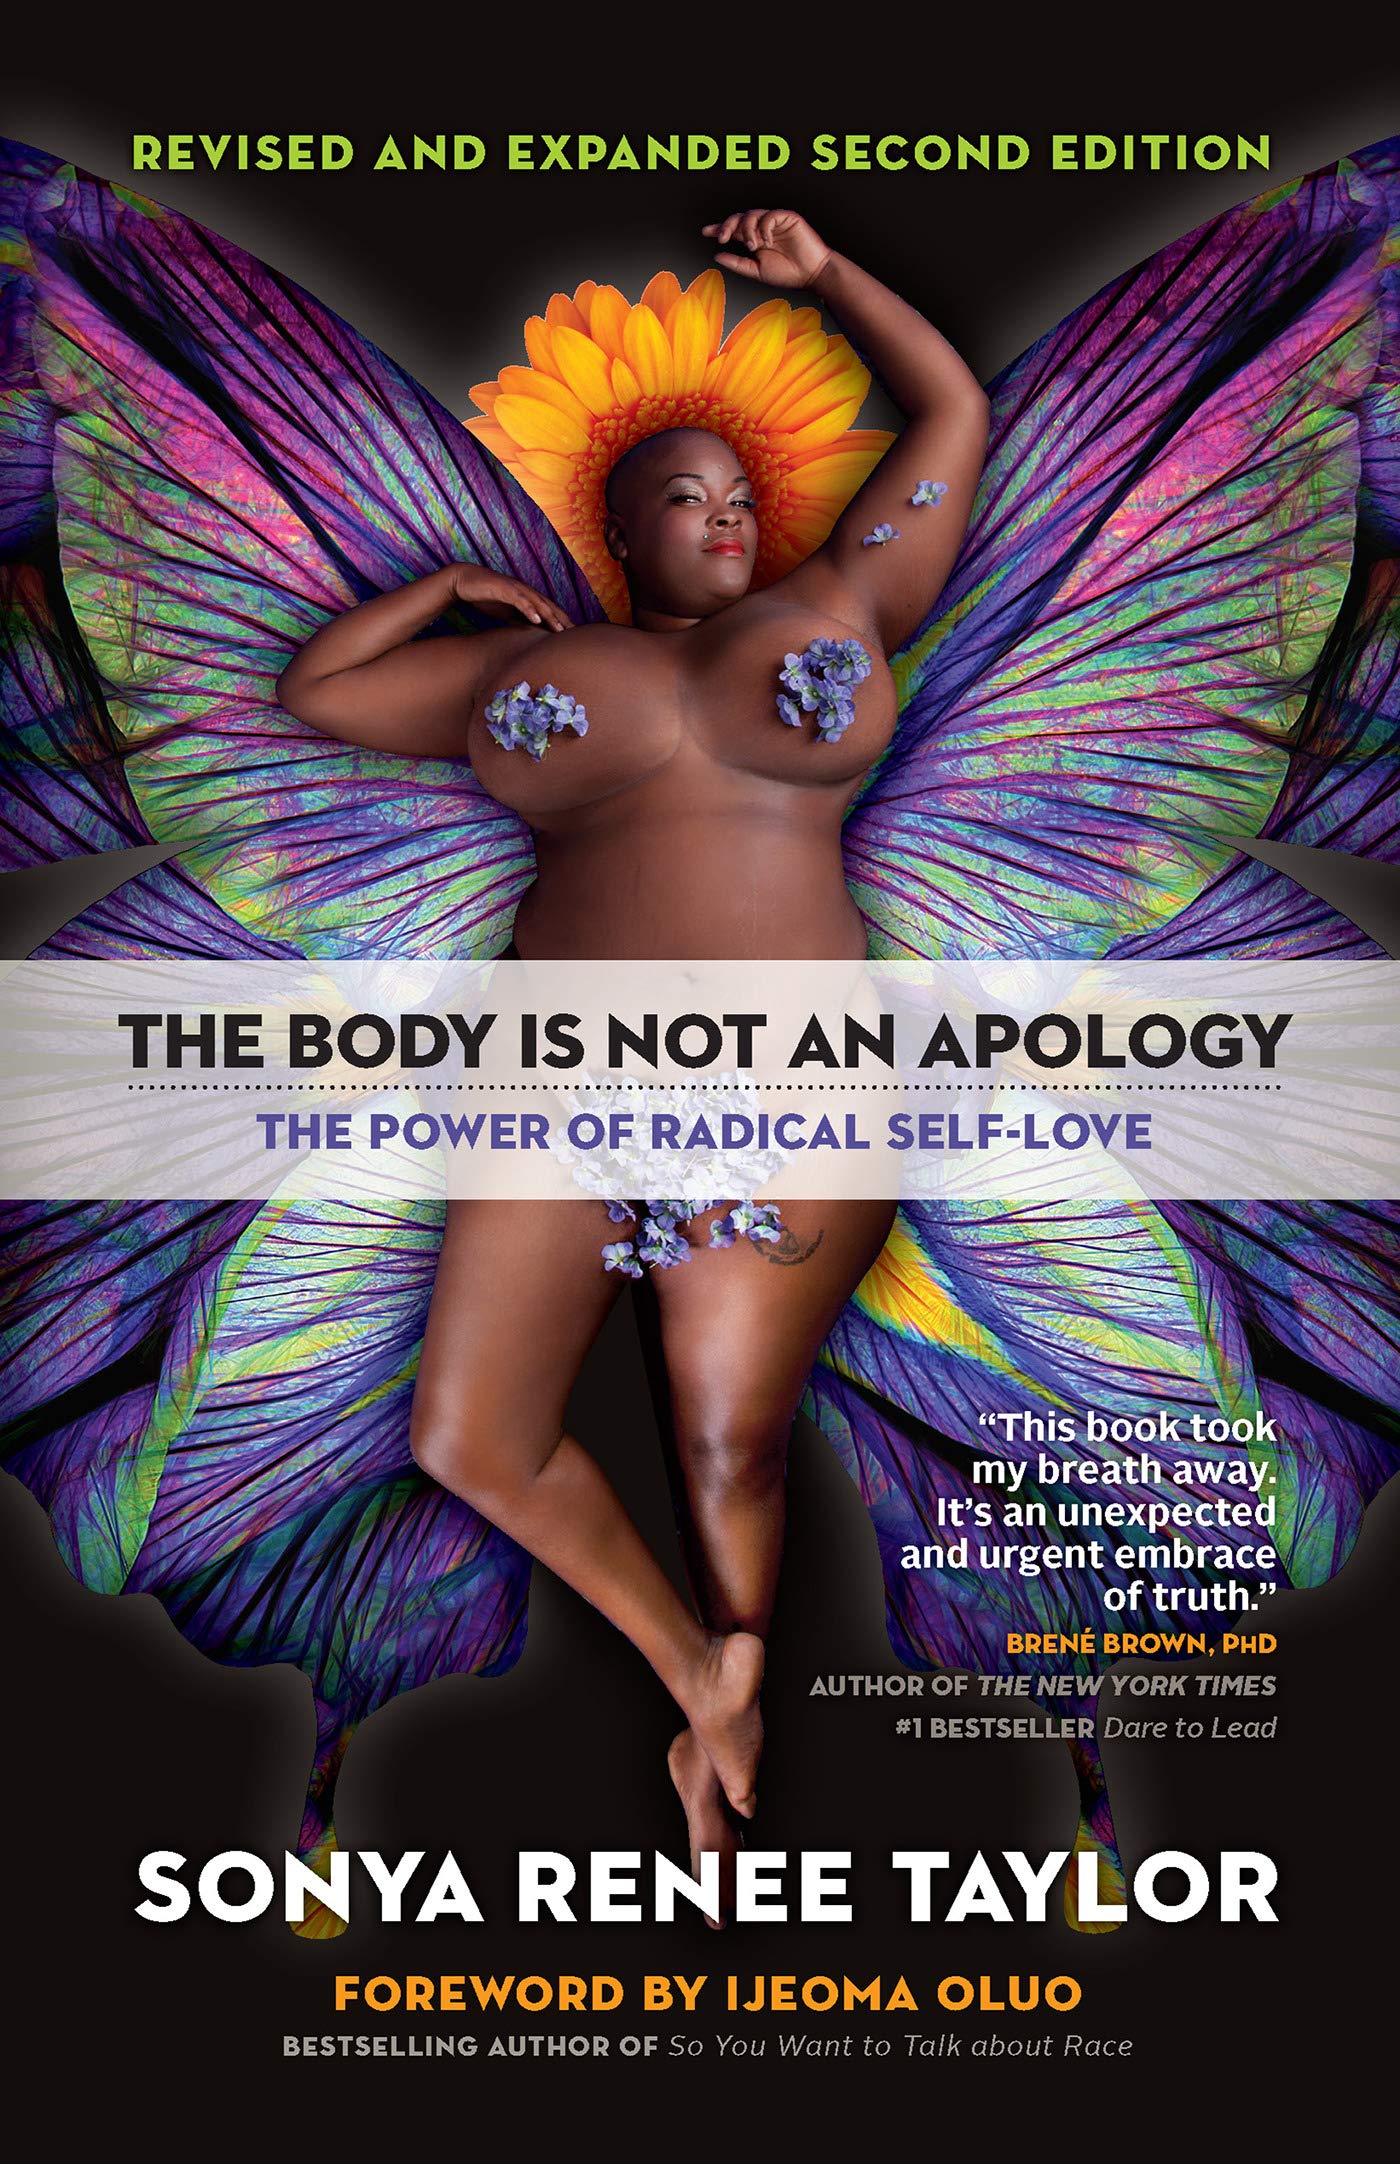 The Body Is Not an Apology // The Power of Radical Self-Love